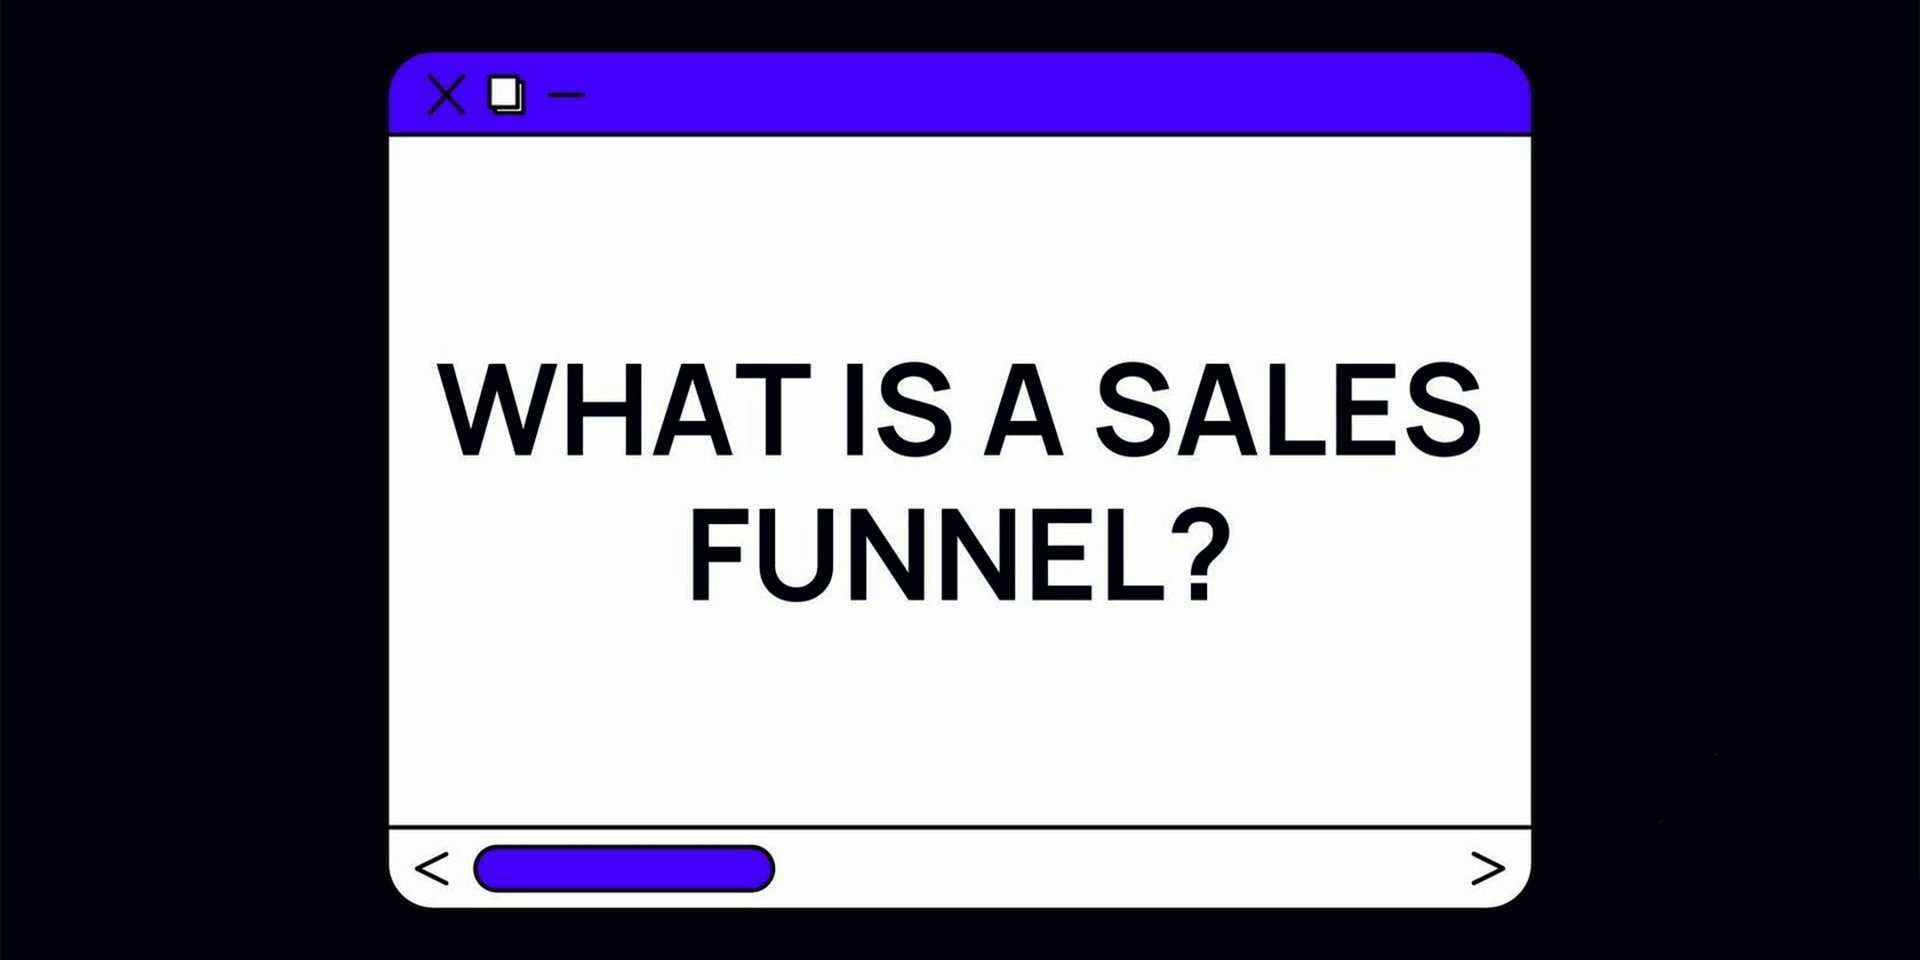 What is a Sales Funnel